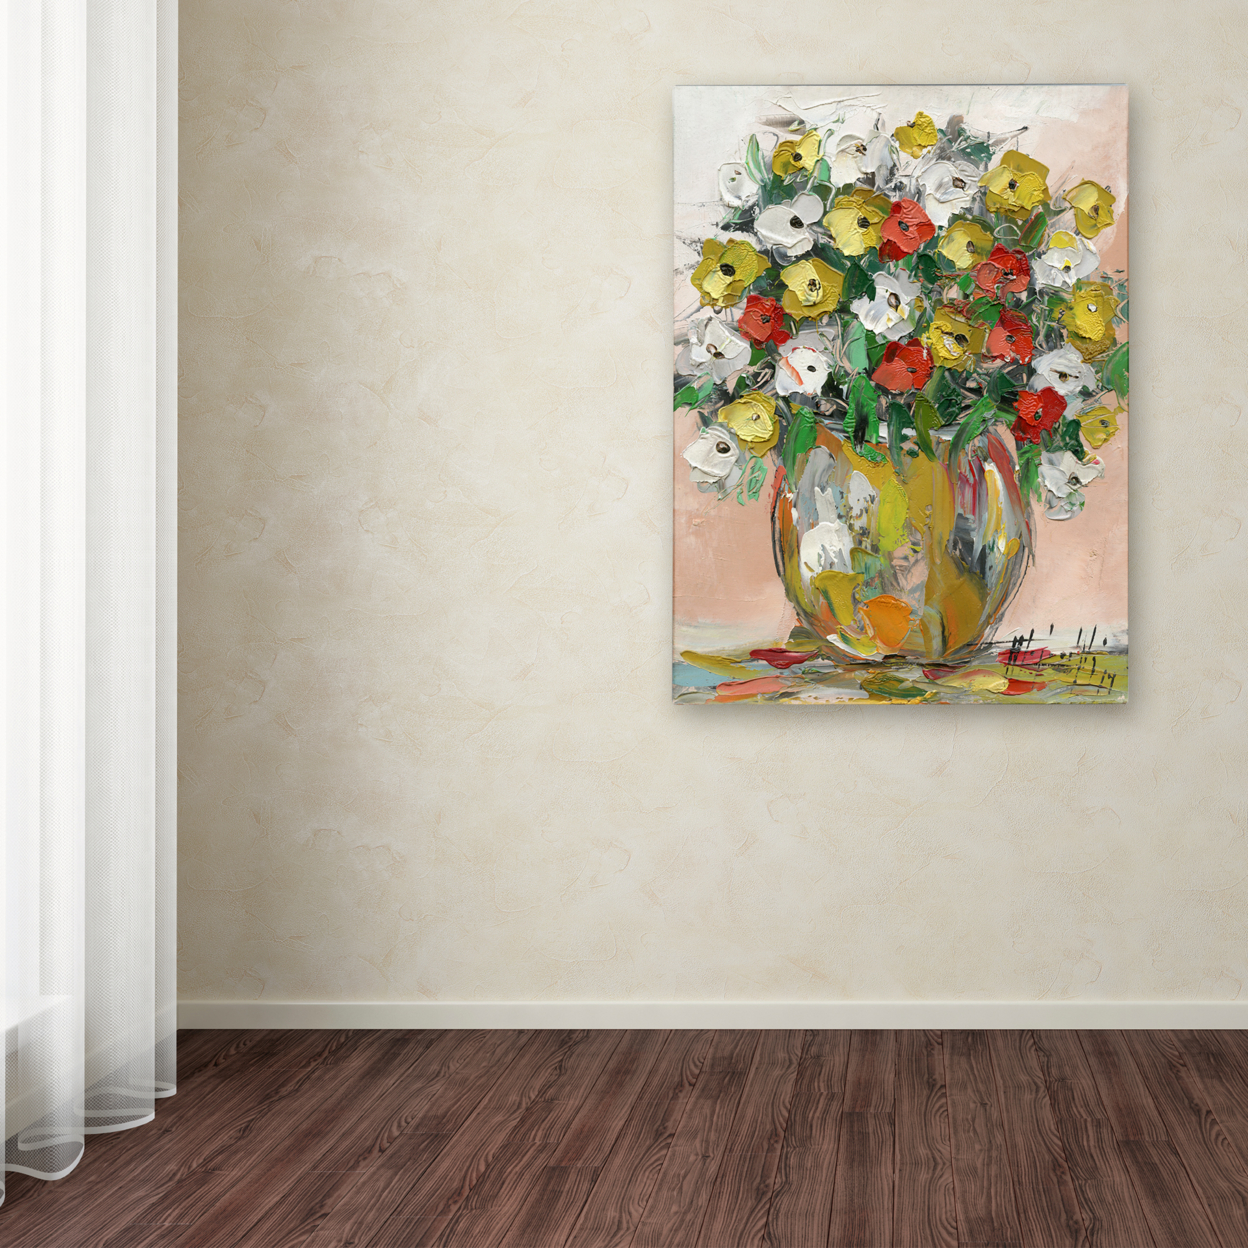 Hai Odelia 'Spring Flowers In A Vase 8' Canvas Wall Art 35 X 47 Inches